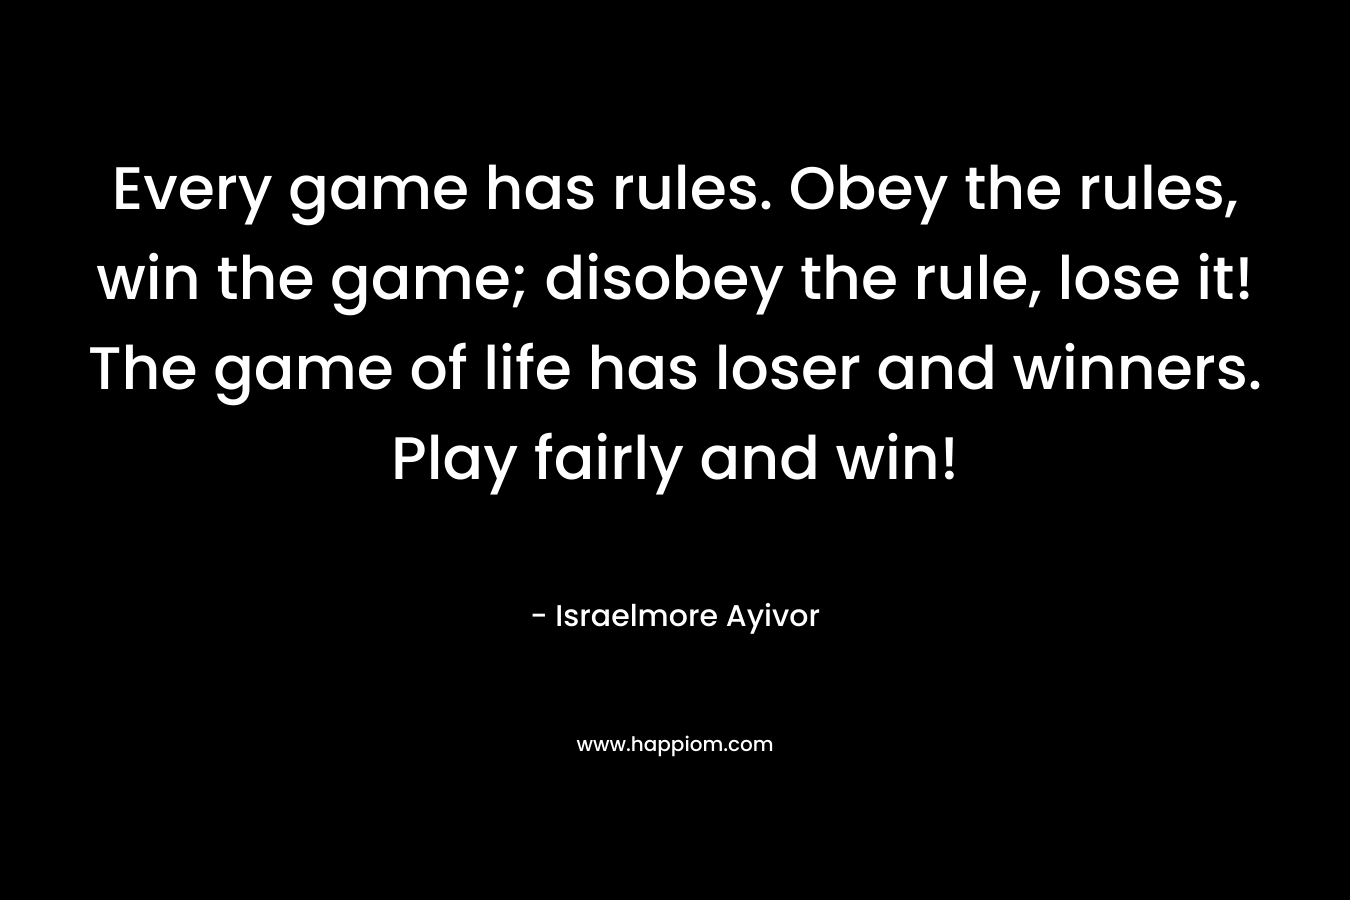 Every game has rules. Obey the rules, win the game; disobey the rule, lose it! The game of life has loser and winners. Play fairly and win!